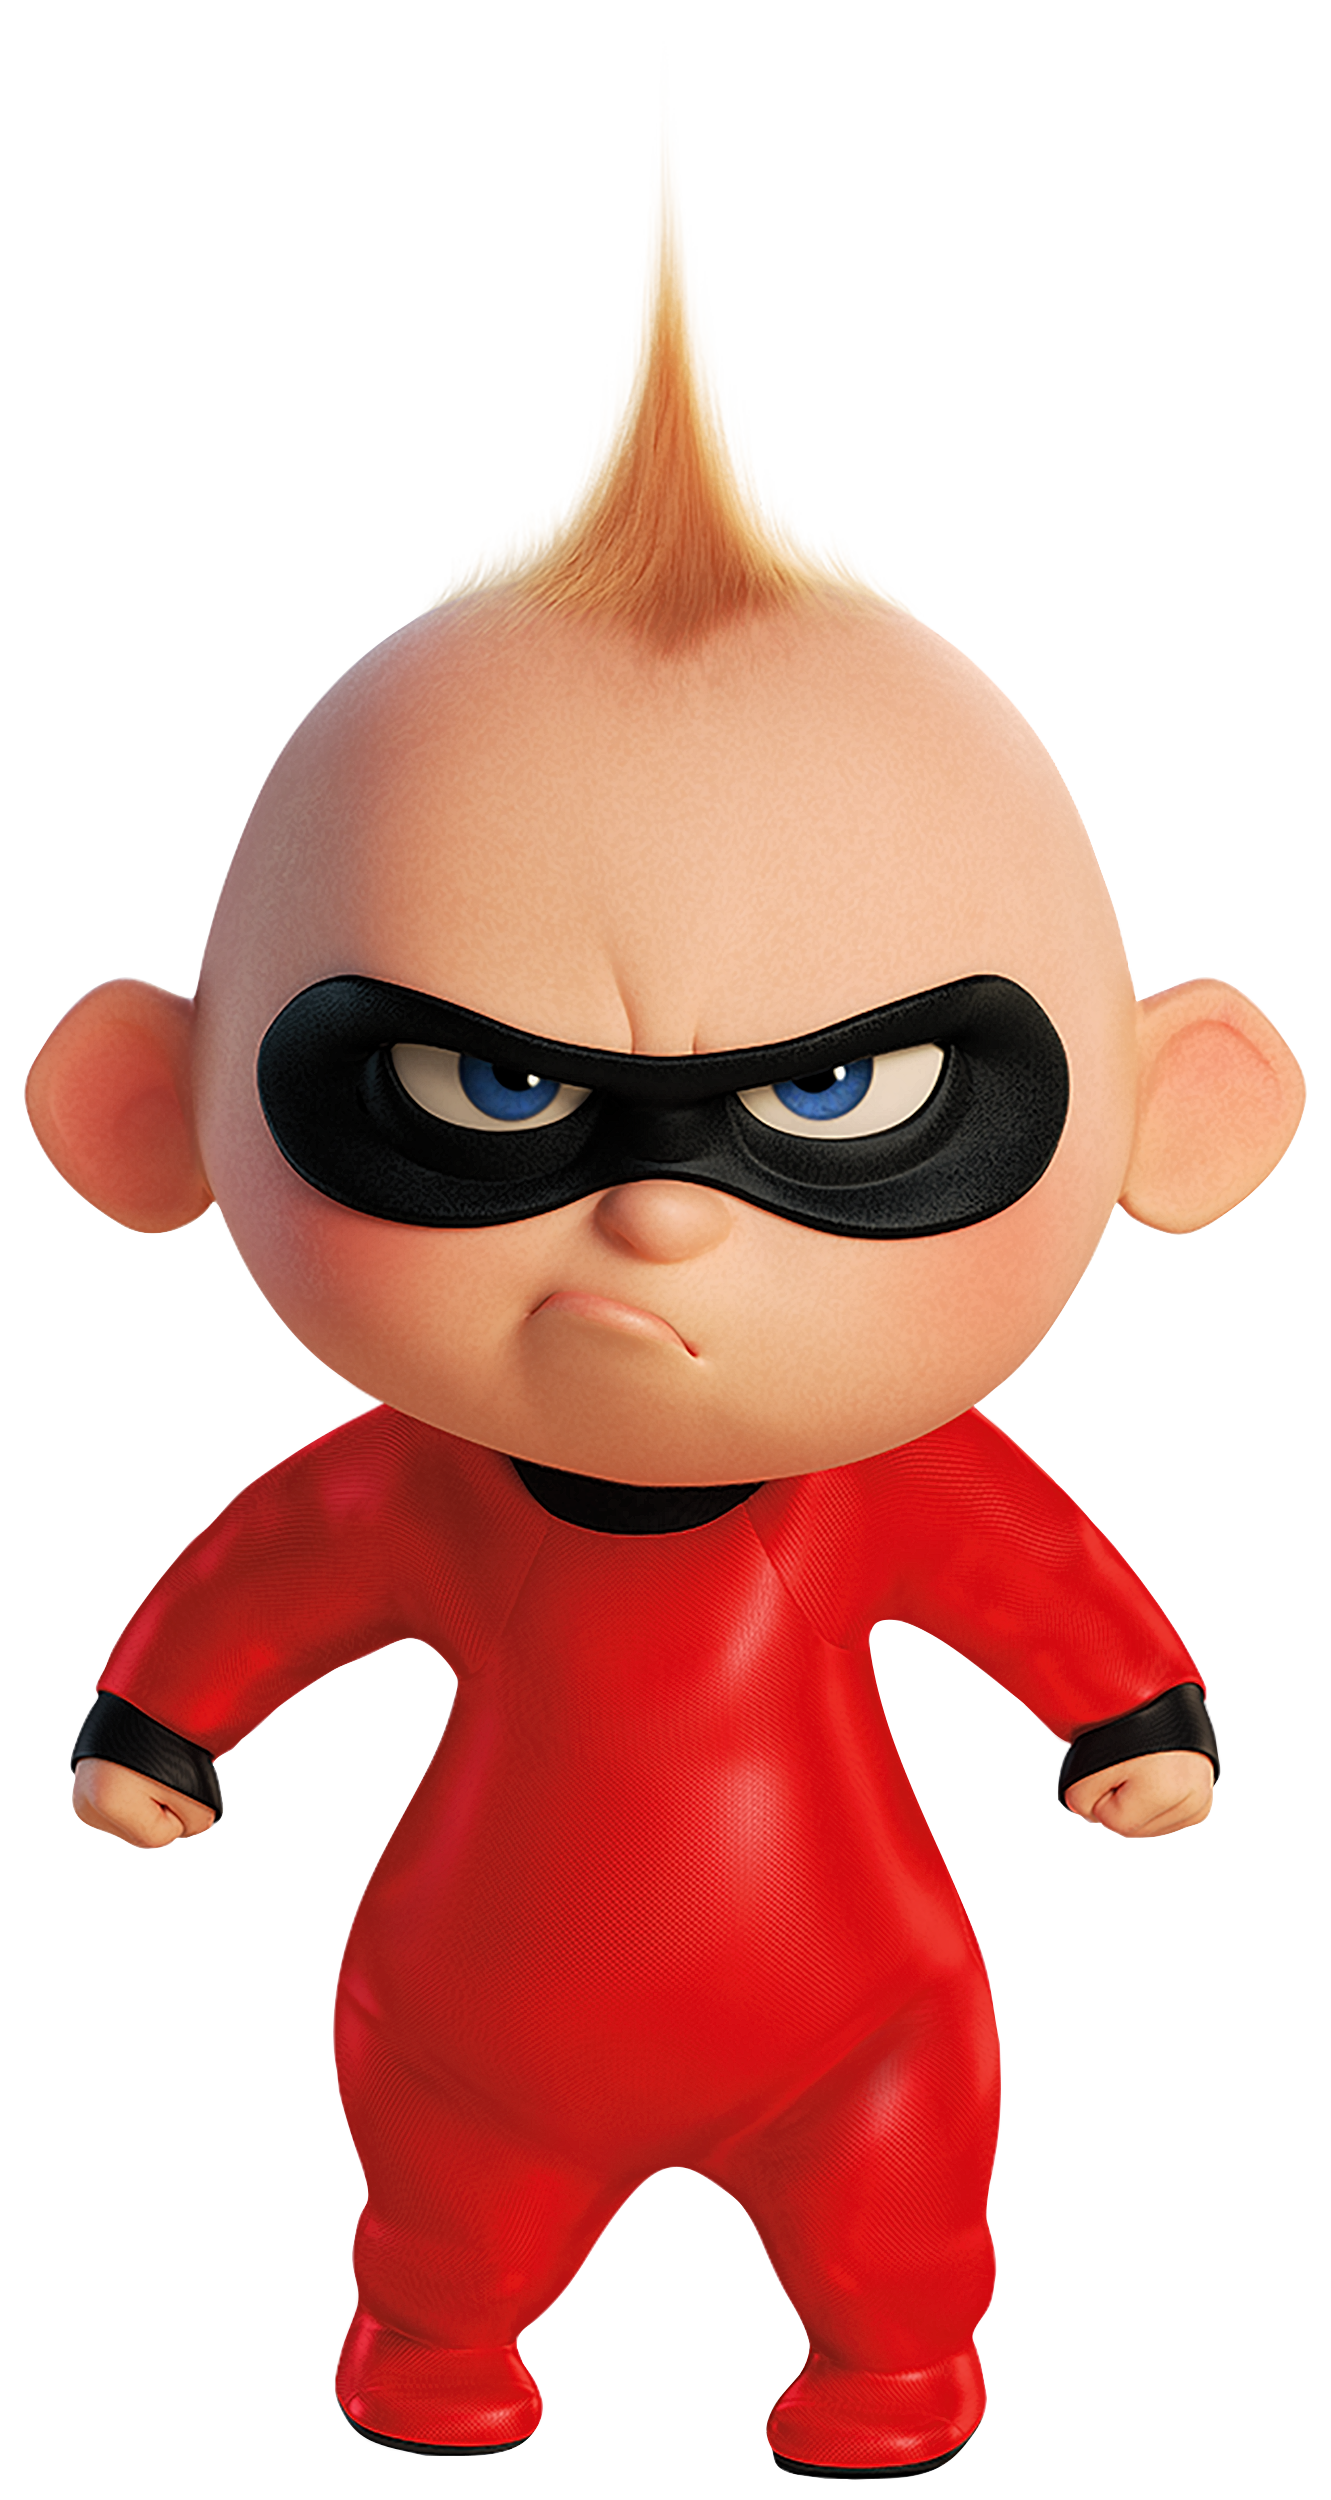 Baby Incredibles 2 PNG Cartoon Image Quality Image And Transpar. Cute Disney Wallpaper, Kid Movies Disney, Cute Cartoon Wallpaper